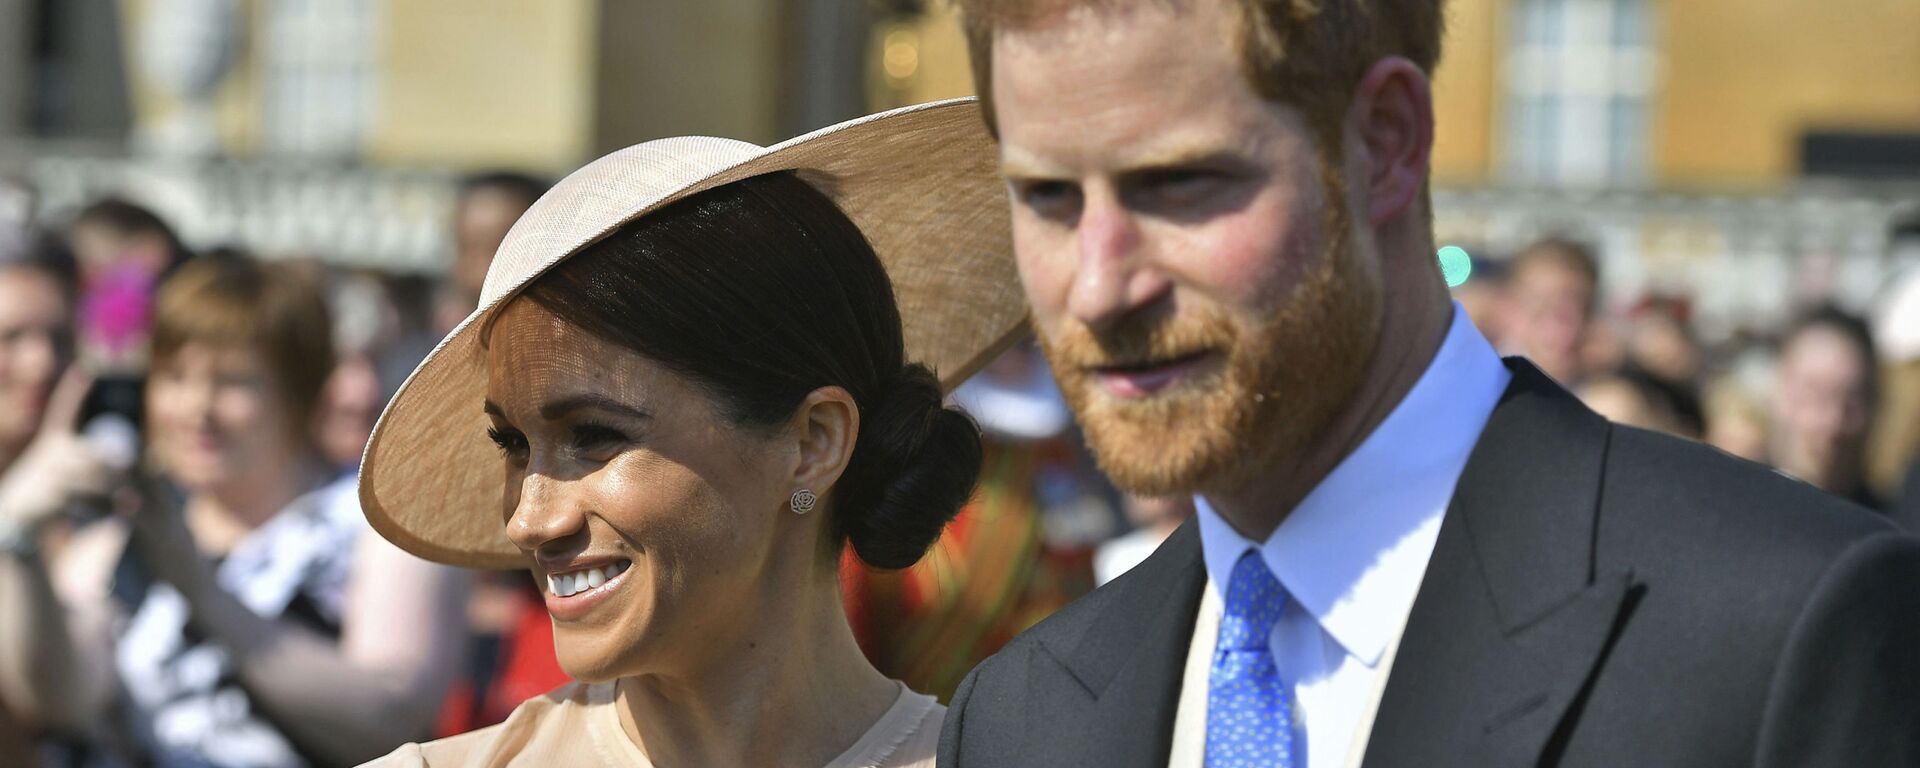 Meghan, the Duchess of Sussex walks with her husband, Prince Harry as they attend a garden party at Buckingham Palace in London, 22 May 2018 - Sputnik International, 1920, 16.07.2020